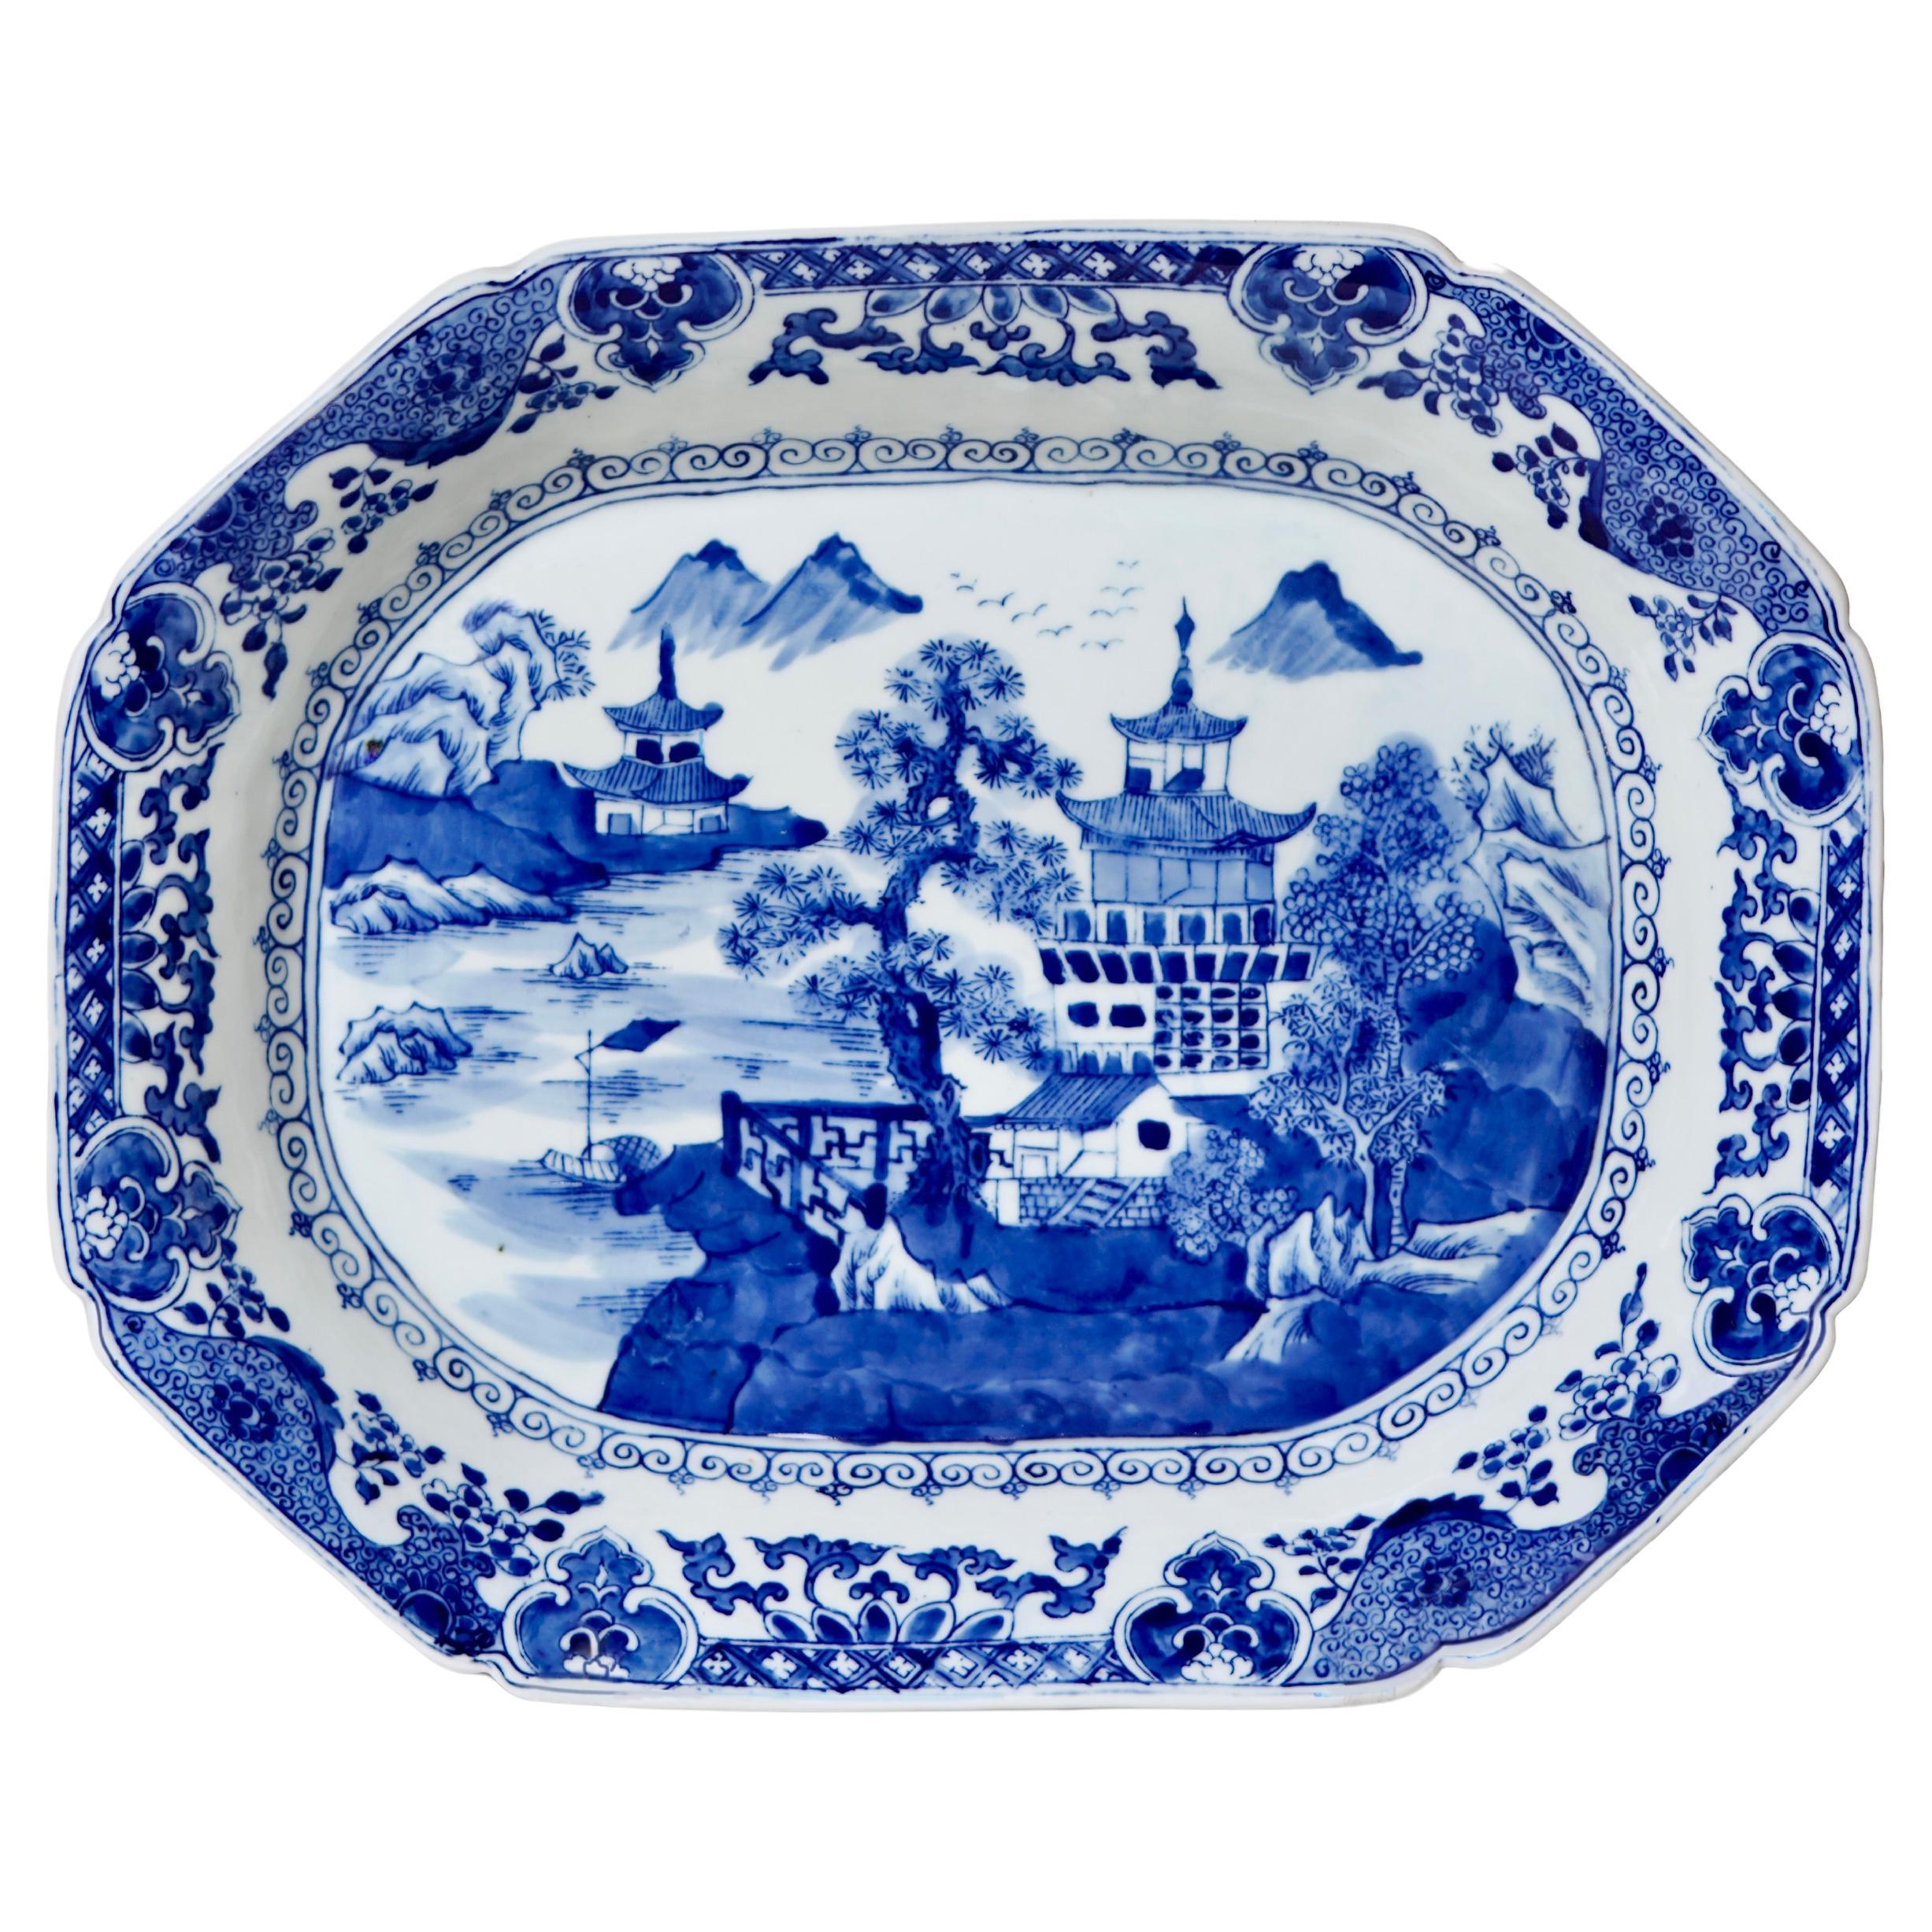 Medium Blue and White Willow Ware Octagonal Porcelain Platter For Sale